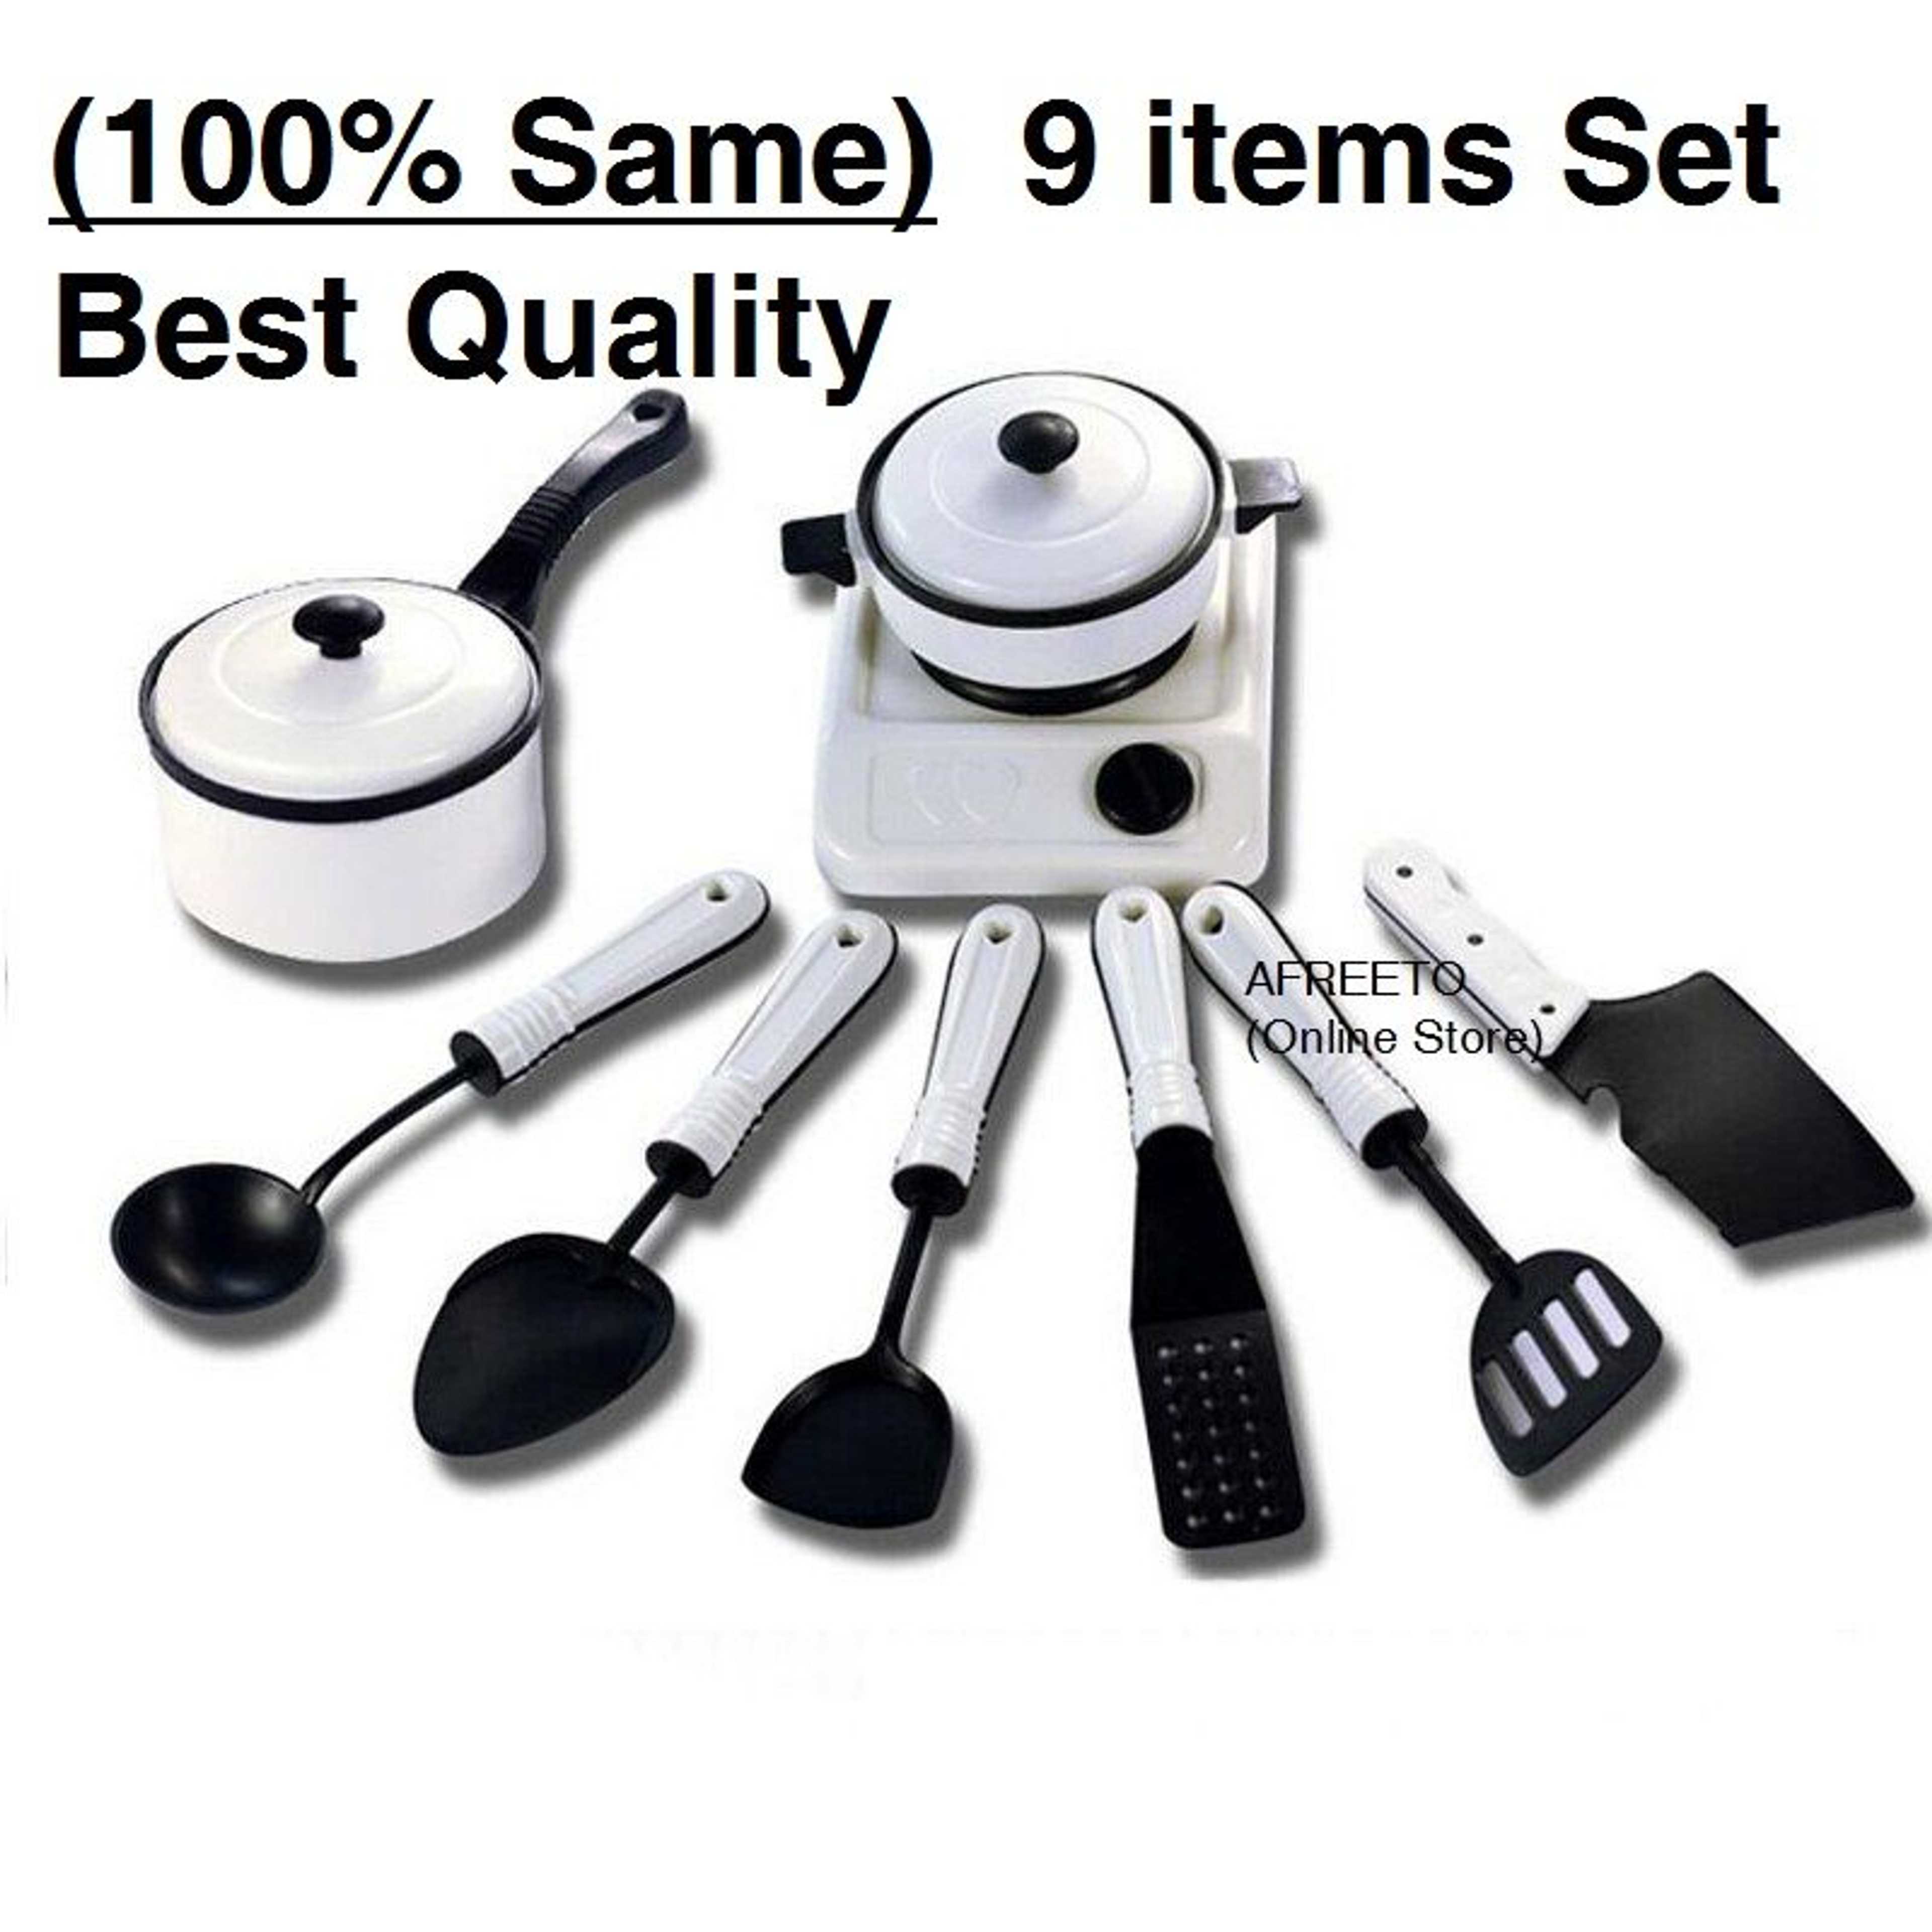 "Kitchen set for kids 9 pieces House Hold Kitchen Accessories toy Set for Girls Small kitchen toy set "